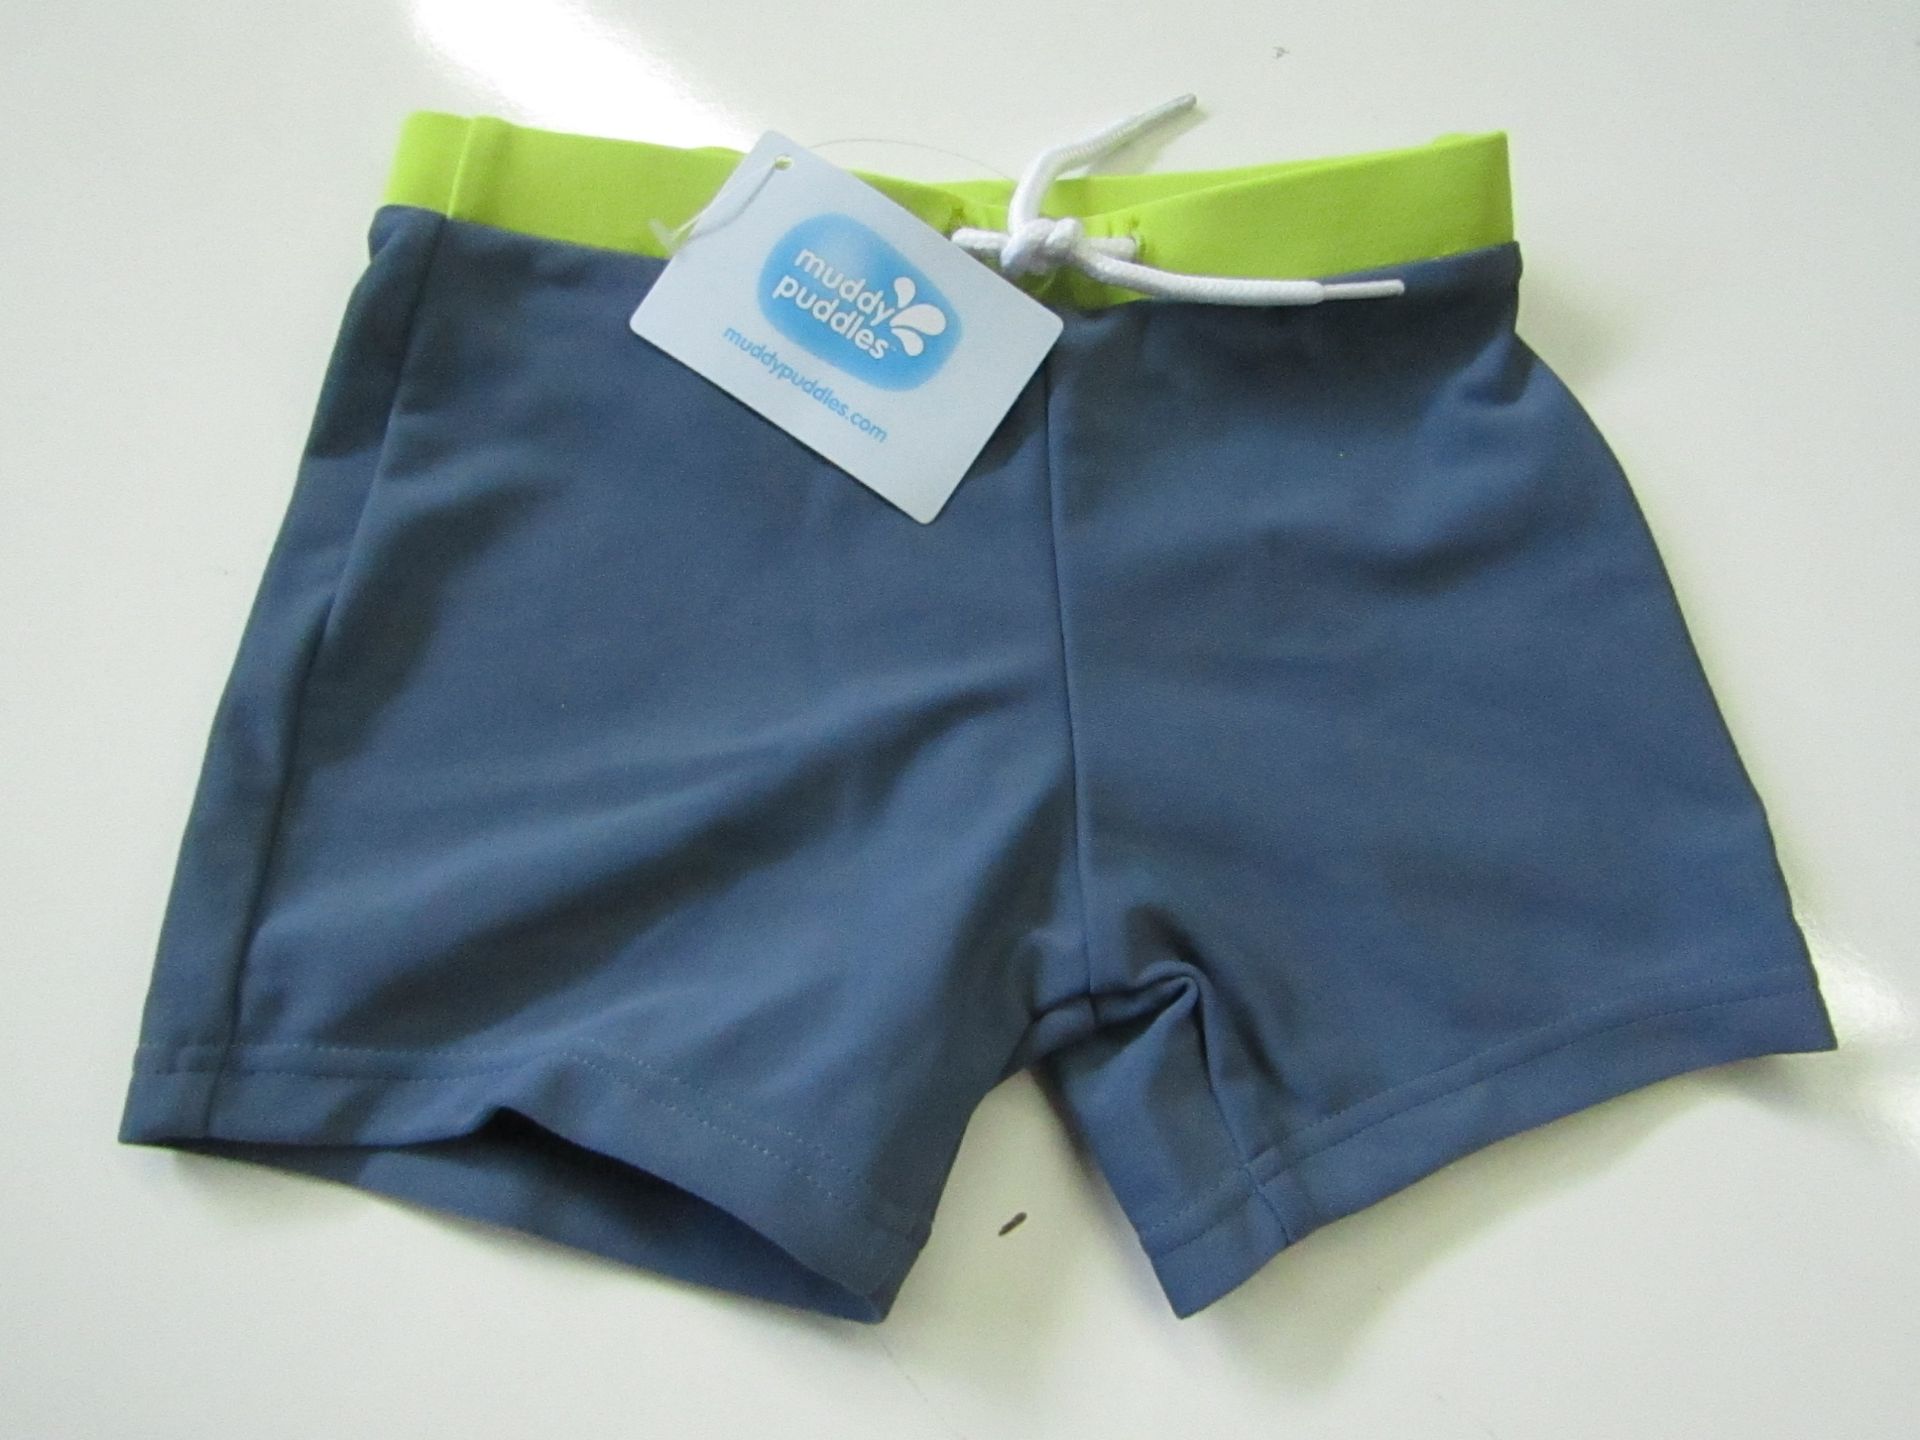 Muddy Puddles 5 X Boys Colour Block Trunks Blue/Lime Aged 2-3 yrs New & Packaged